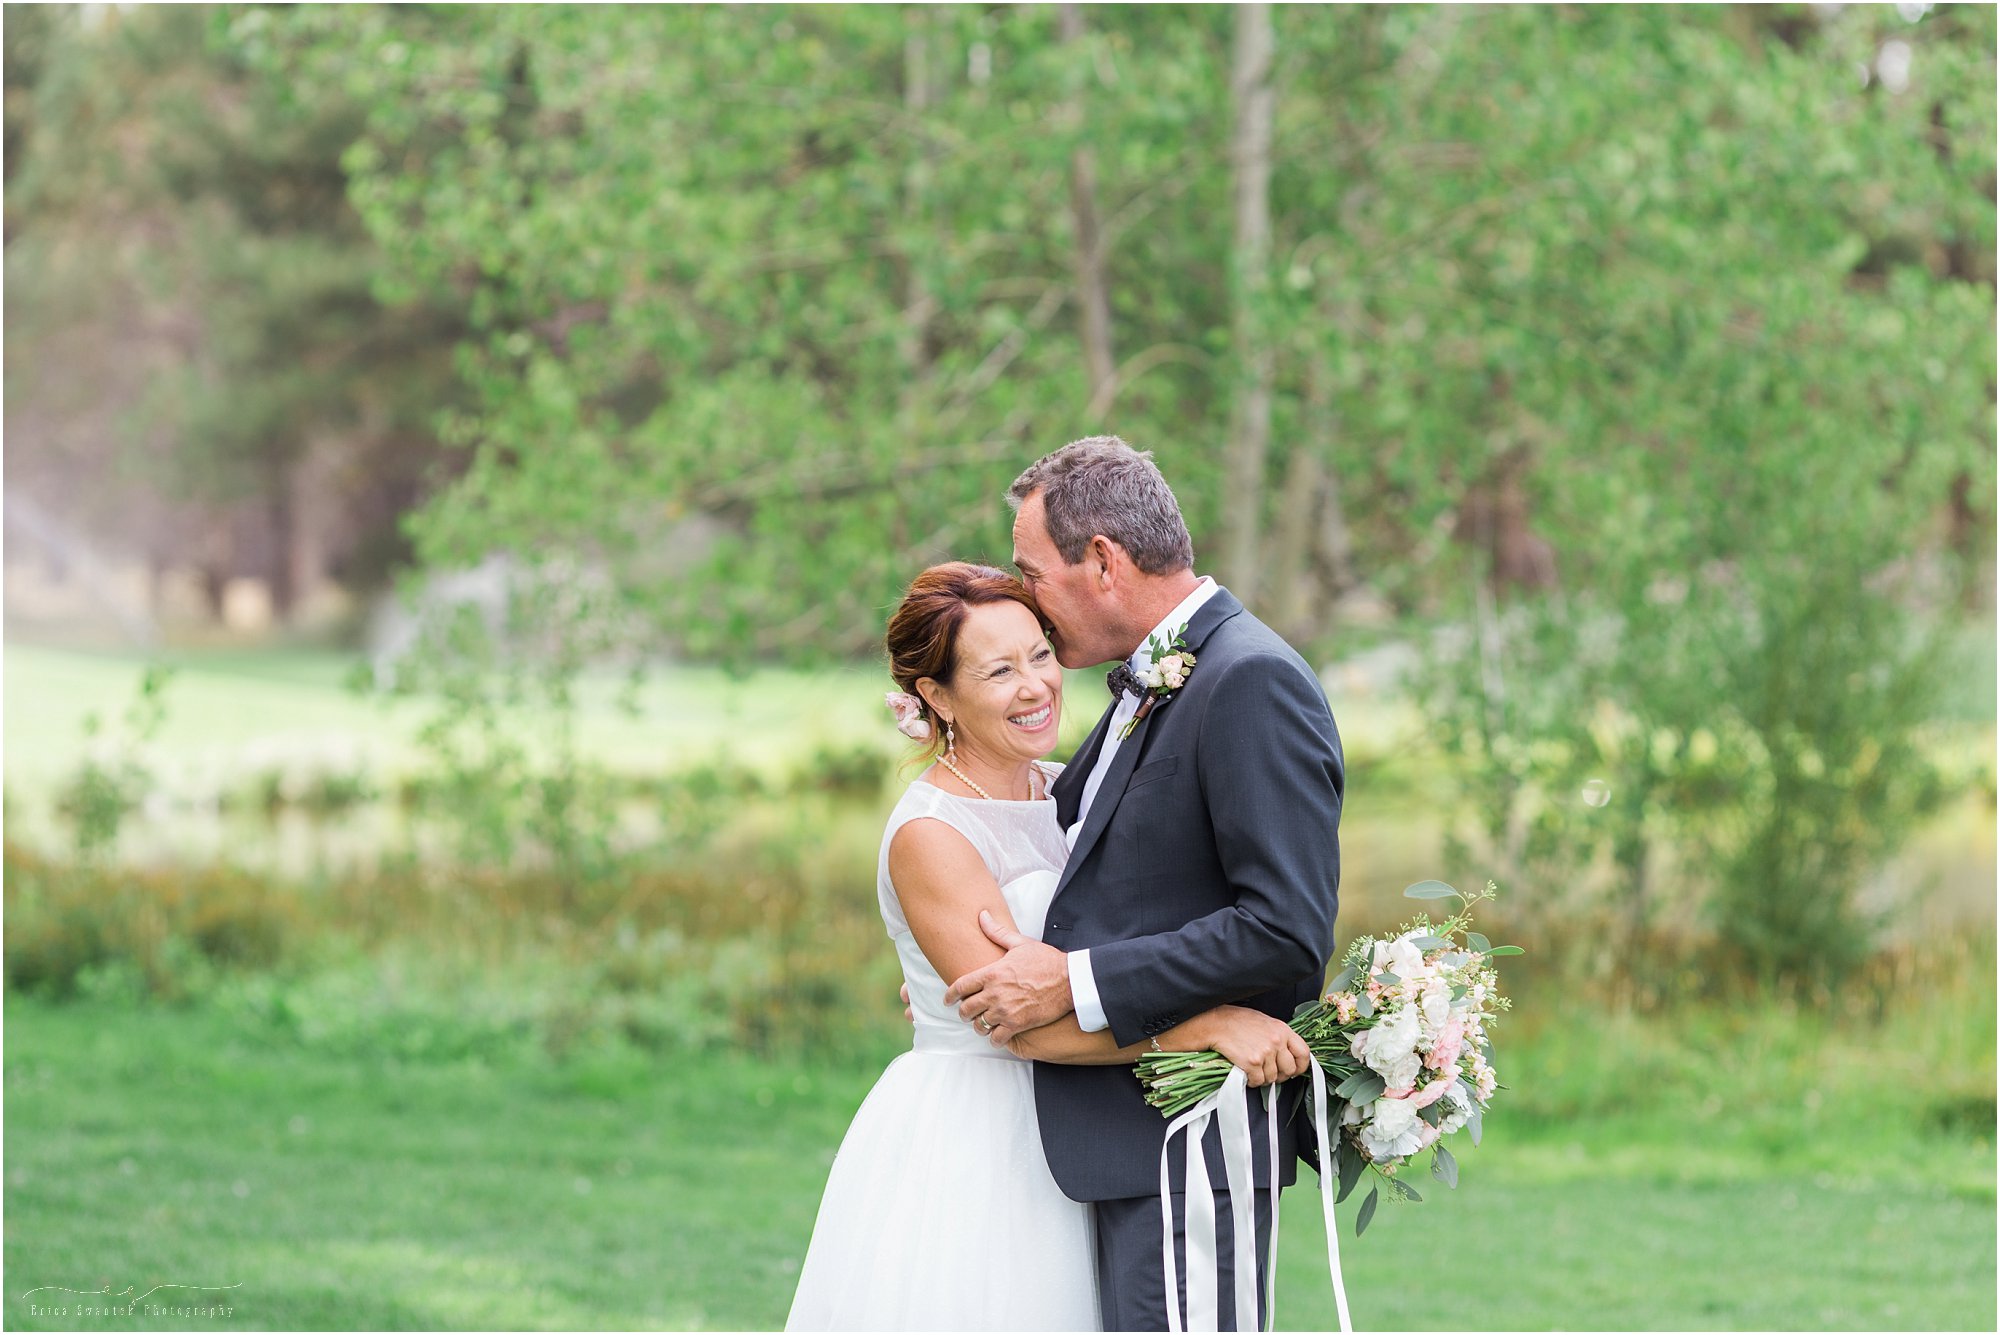 A stunning bride and groom by Bend wedding photographer Erica Swantek Photography